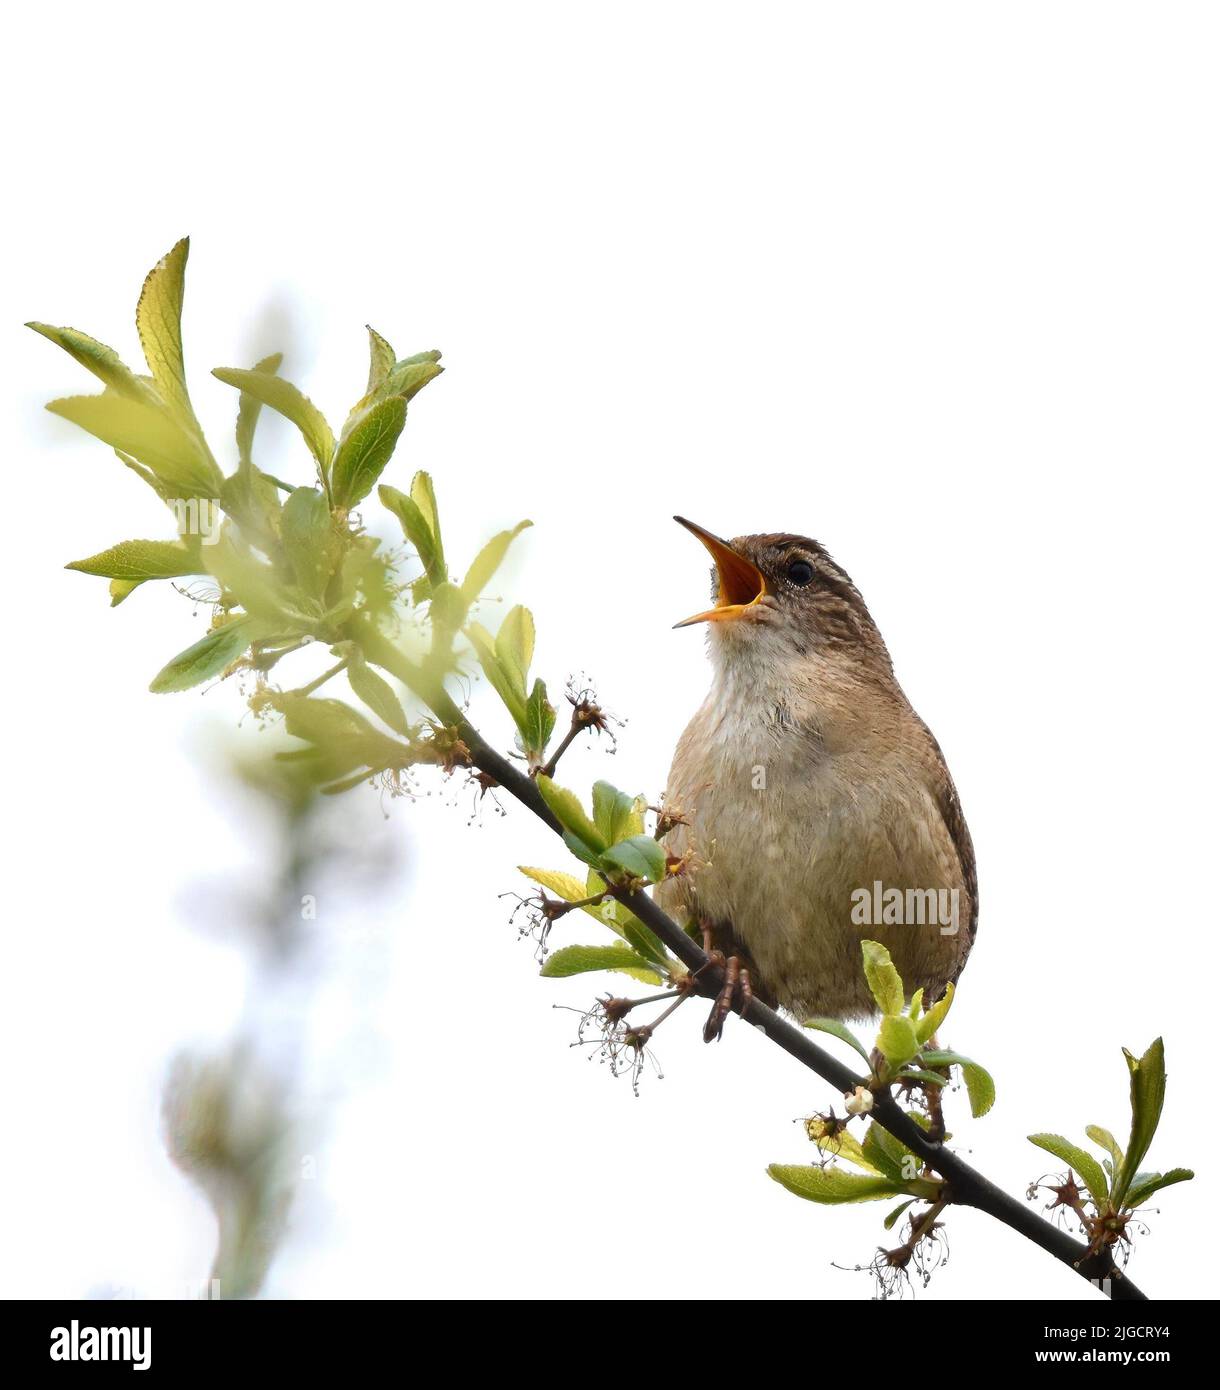 Cetti's Warbler (Cettia cetti) sitting on a branch, singing Stock Photo